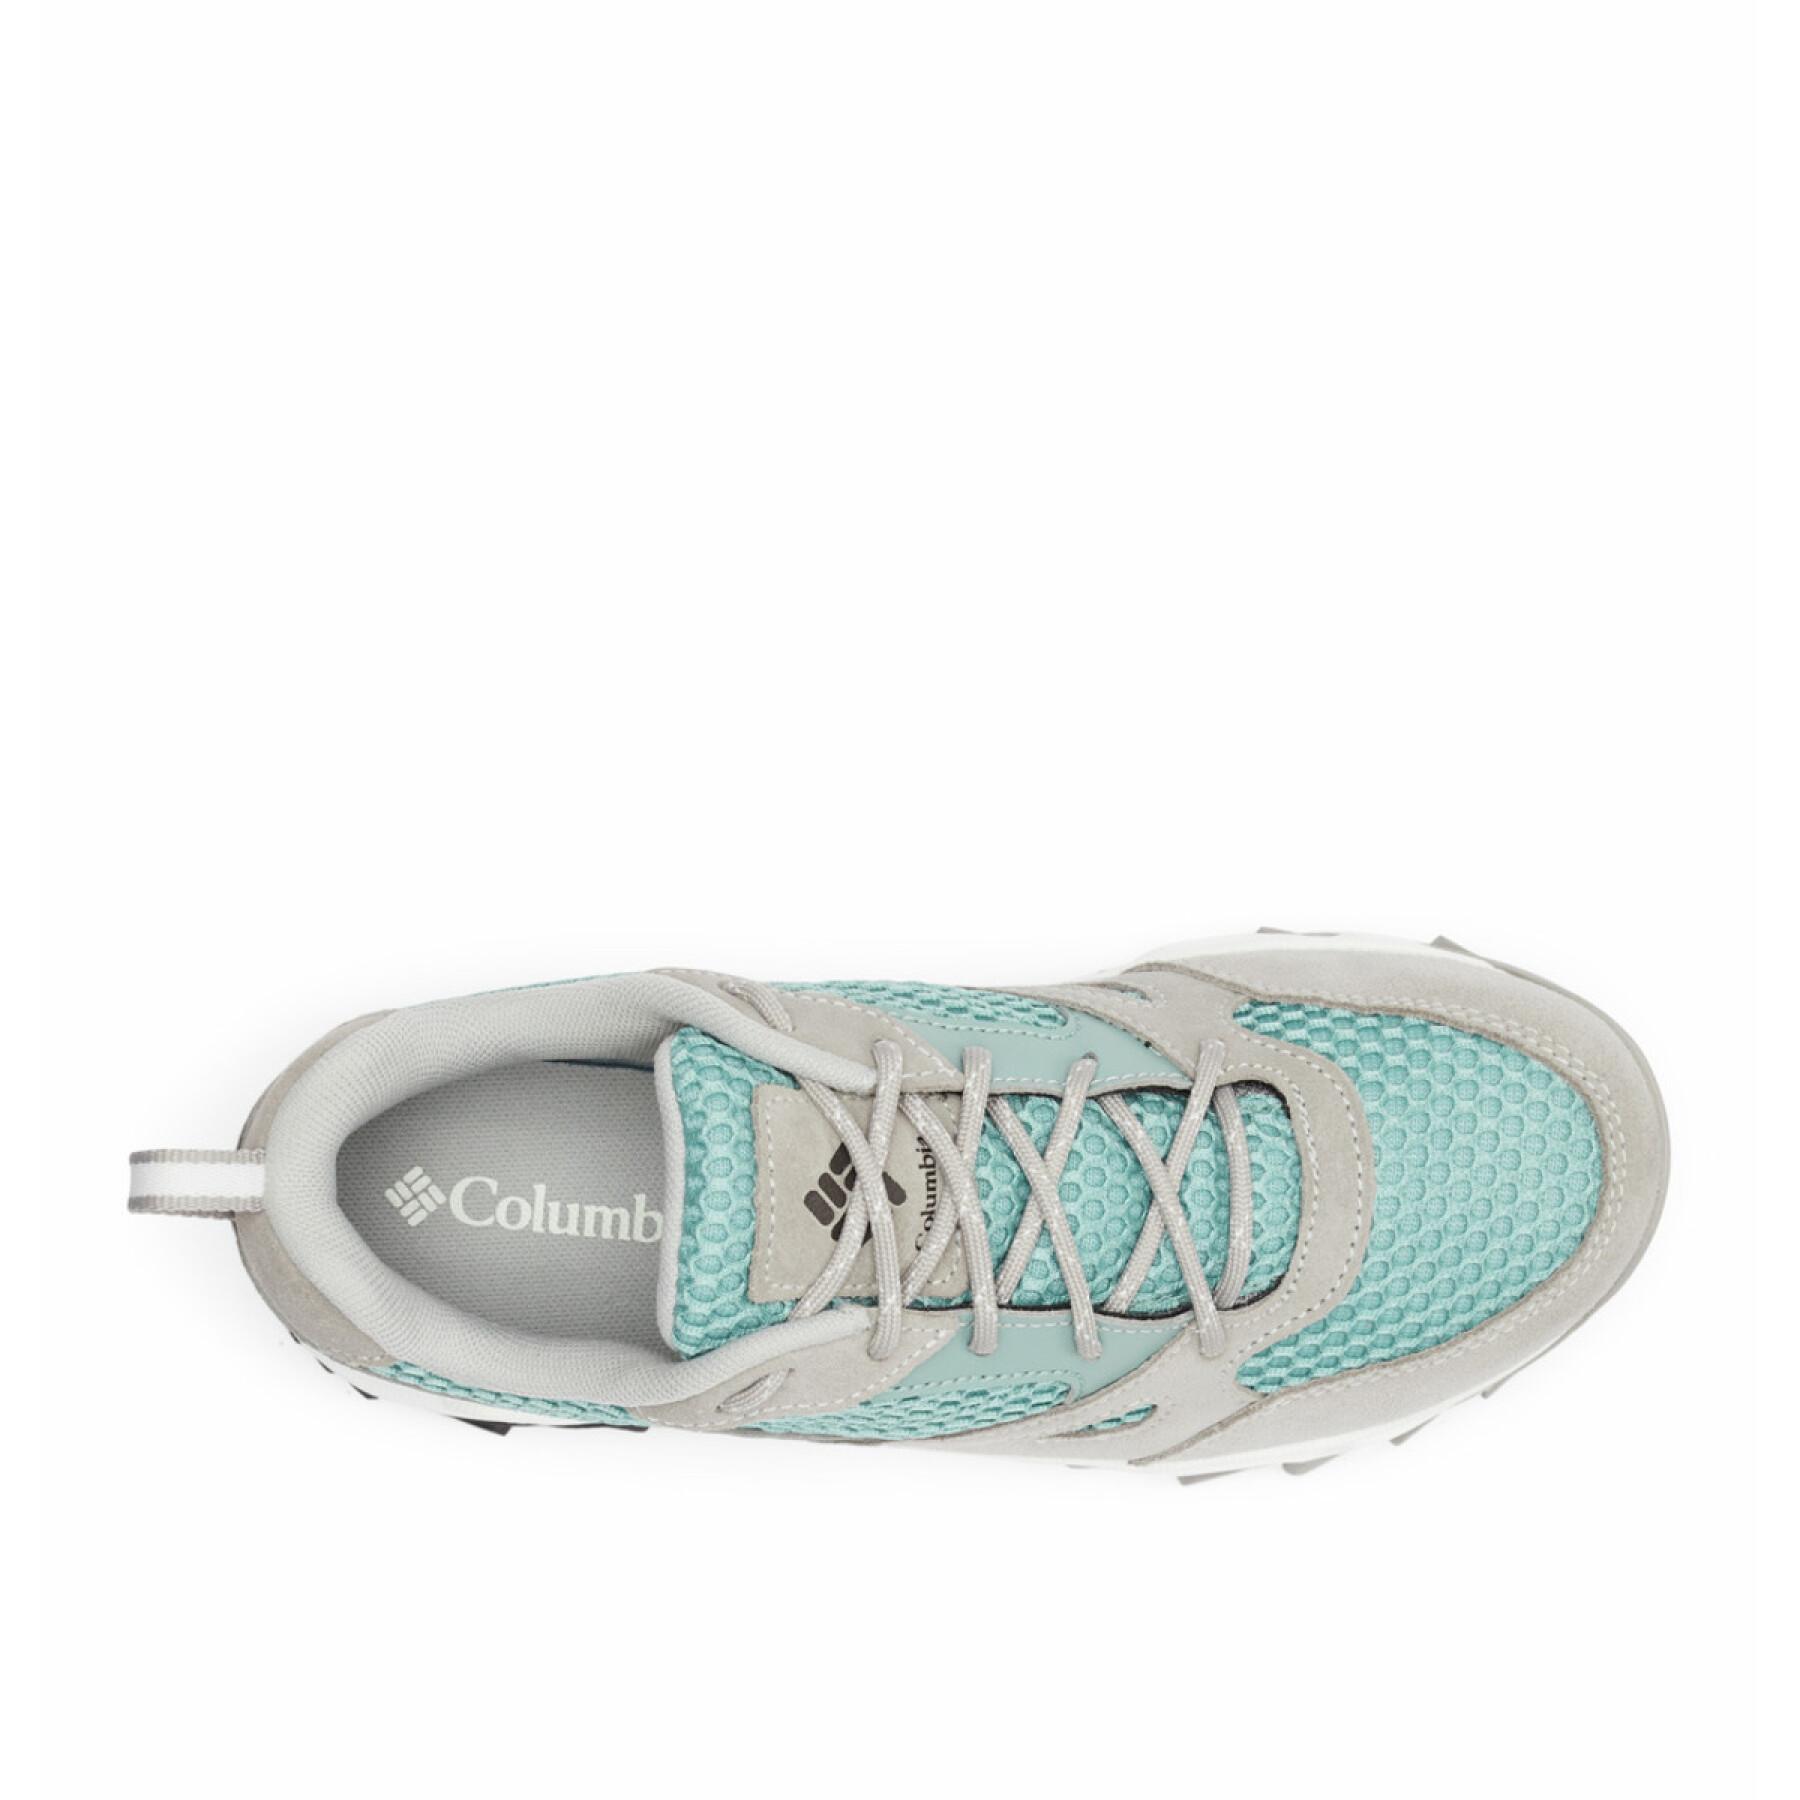 Chaussures femme Columbia IVO TRAIL BREEZE